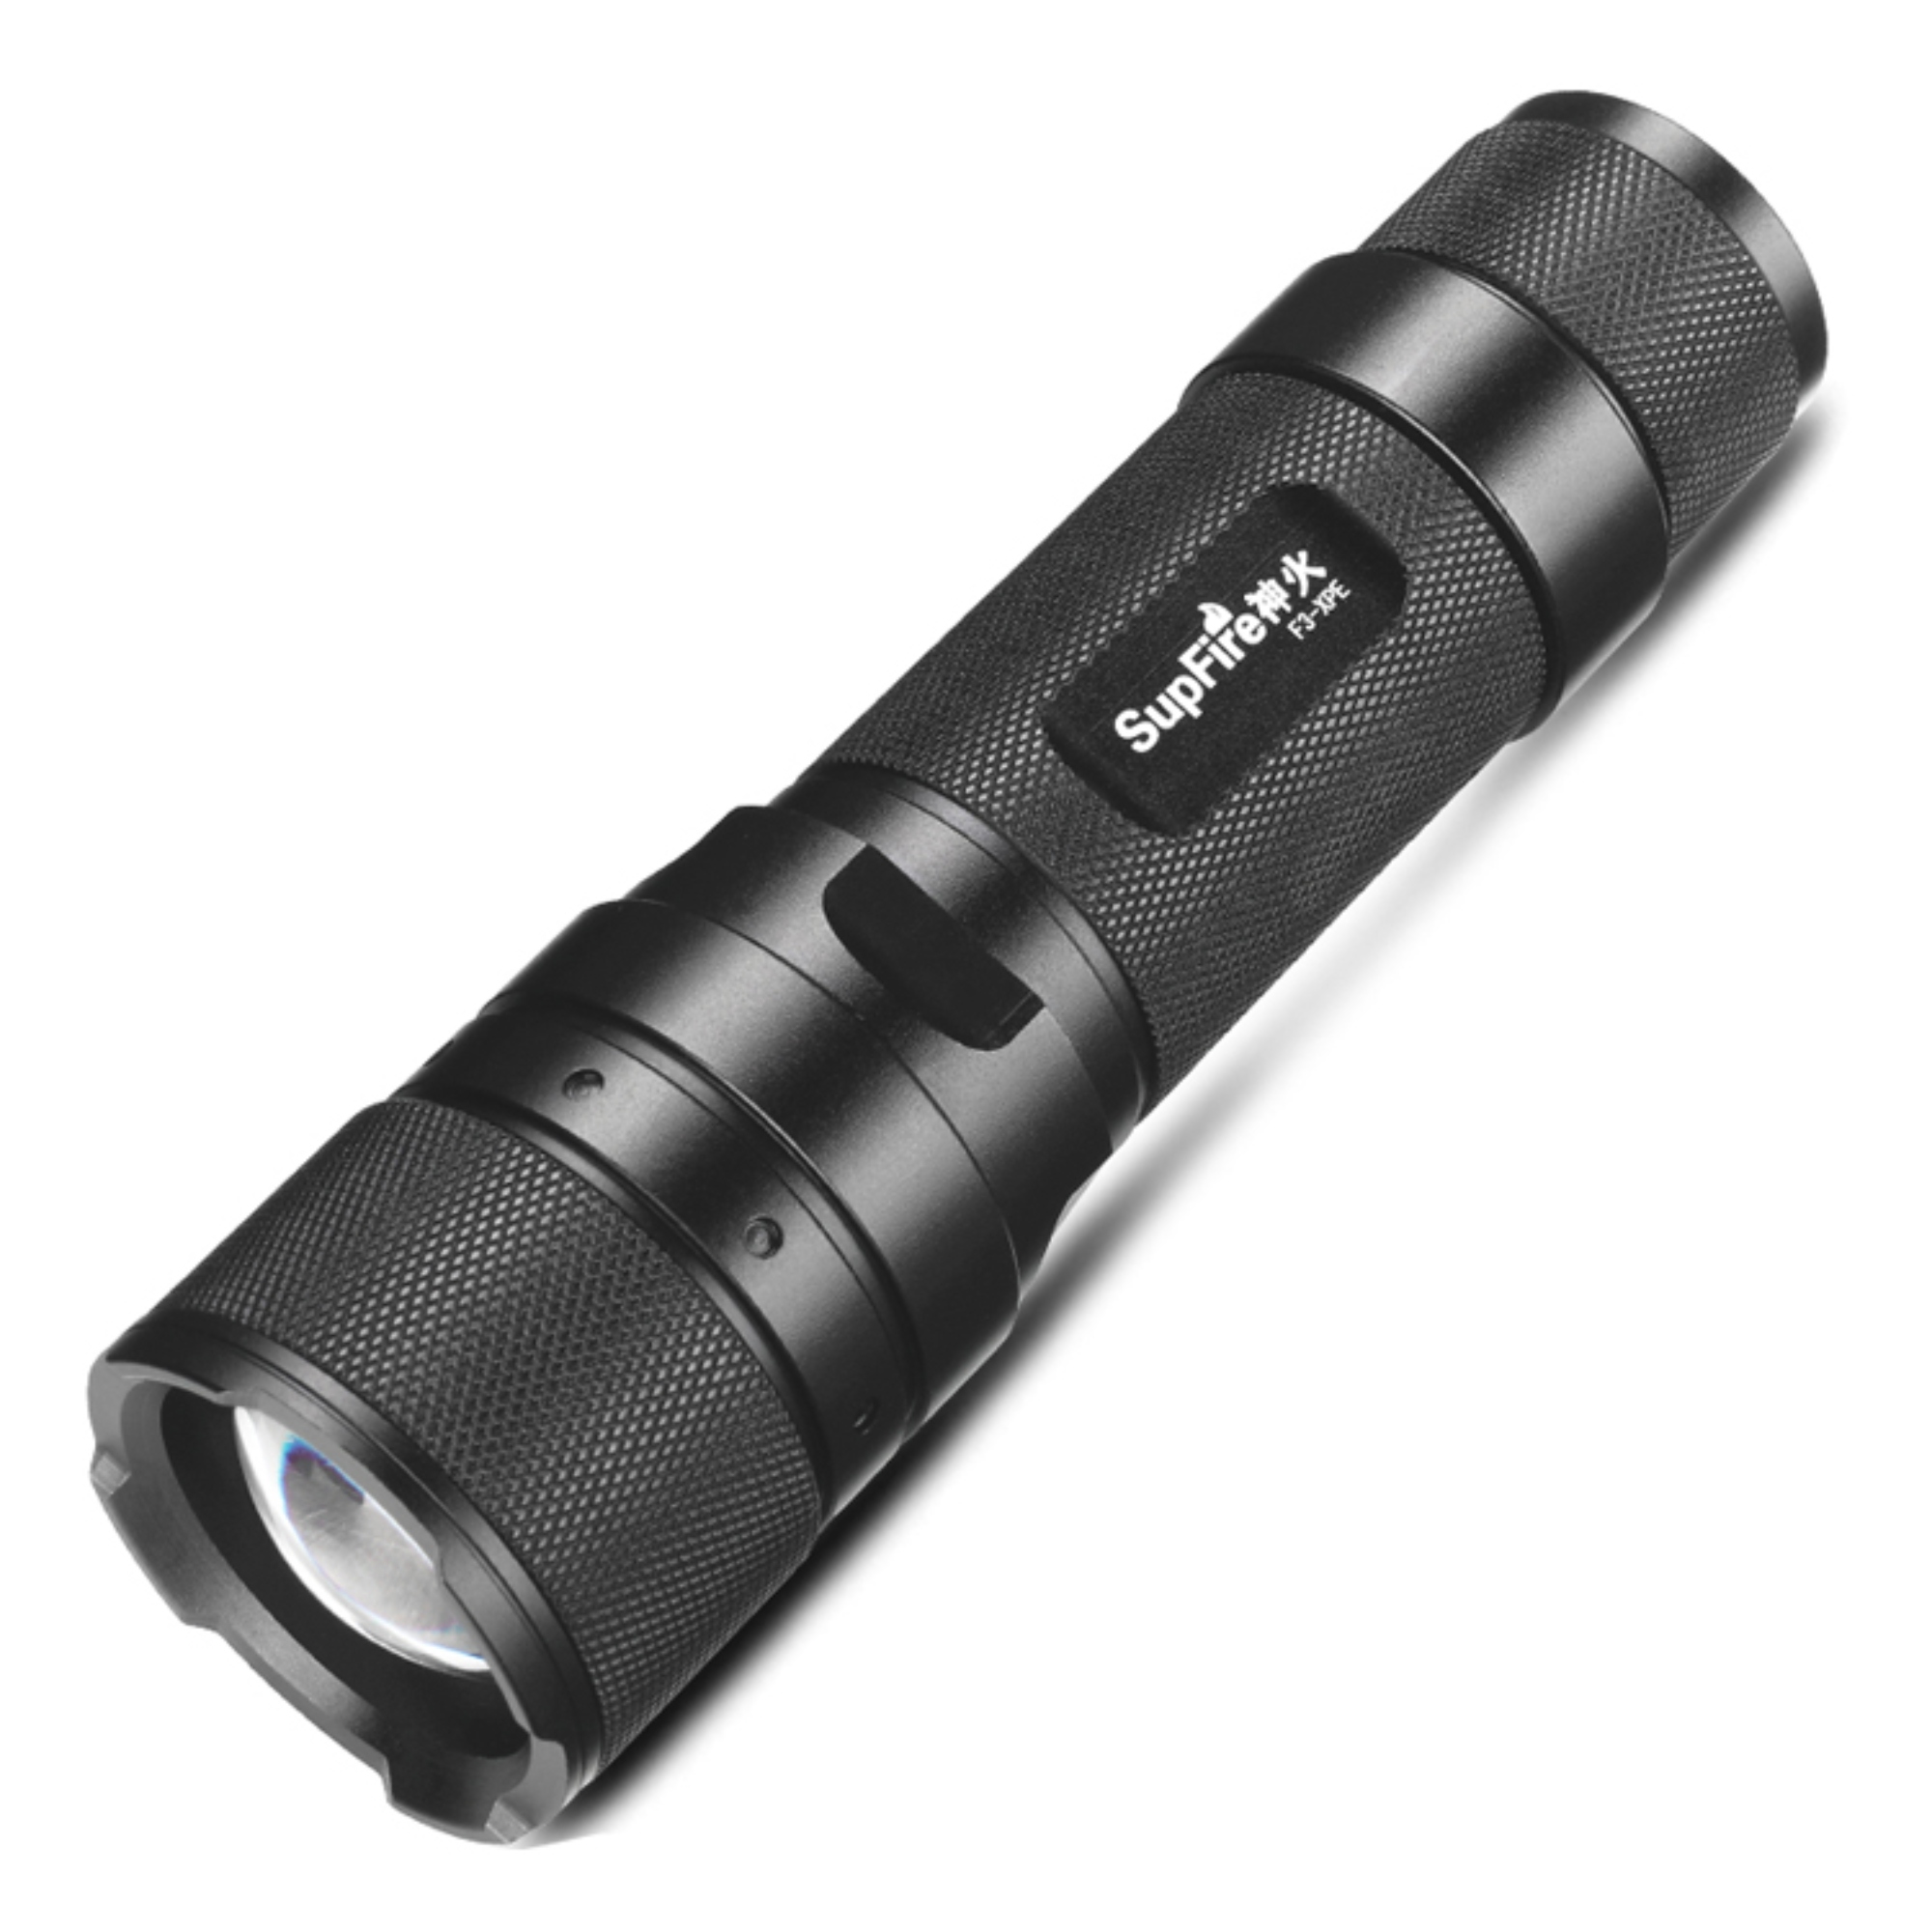 F3-XPE Flashlight with Rechargeable Battery